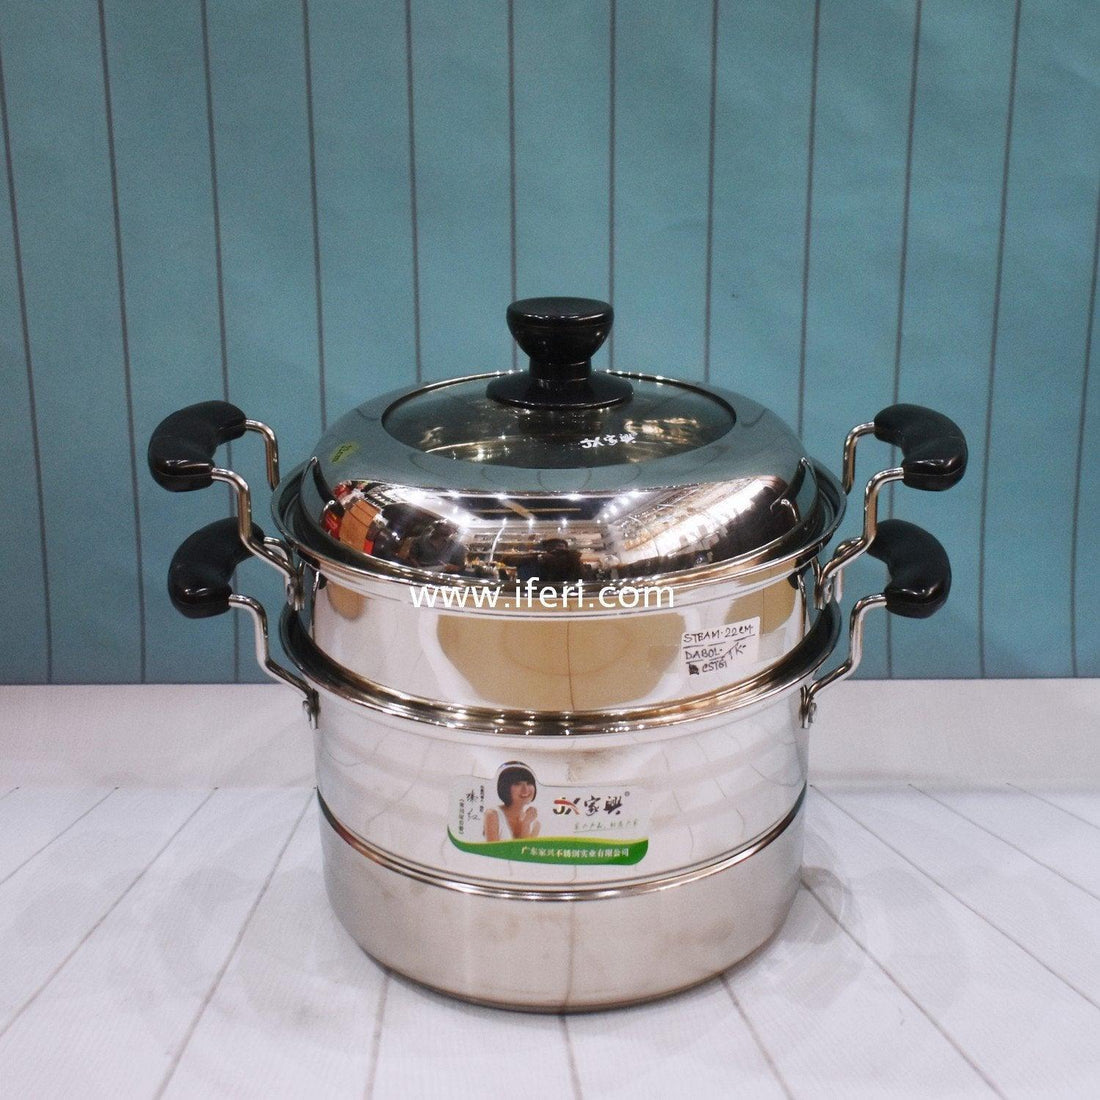 28 cm Tier Stainless Steel Food Steamer with Lid RR5475-1 Price in Bangladesh - iferi.com